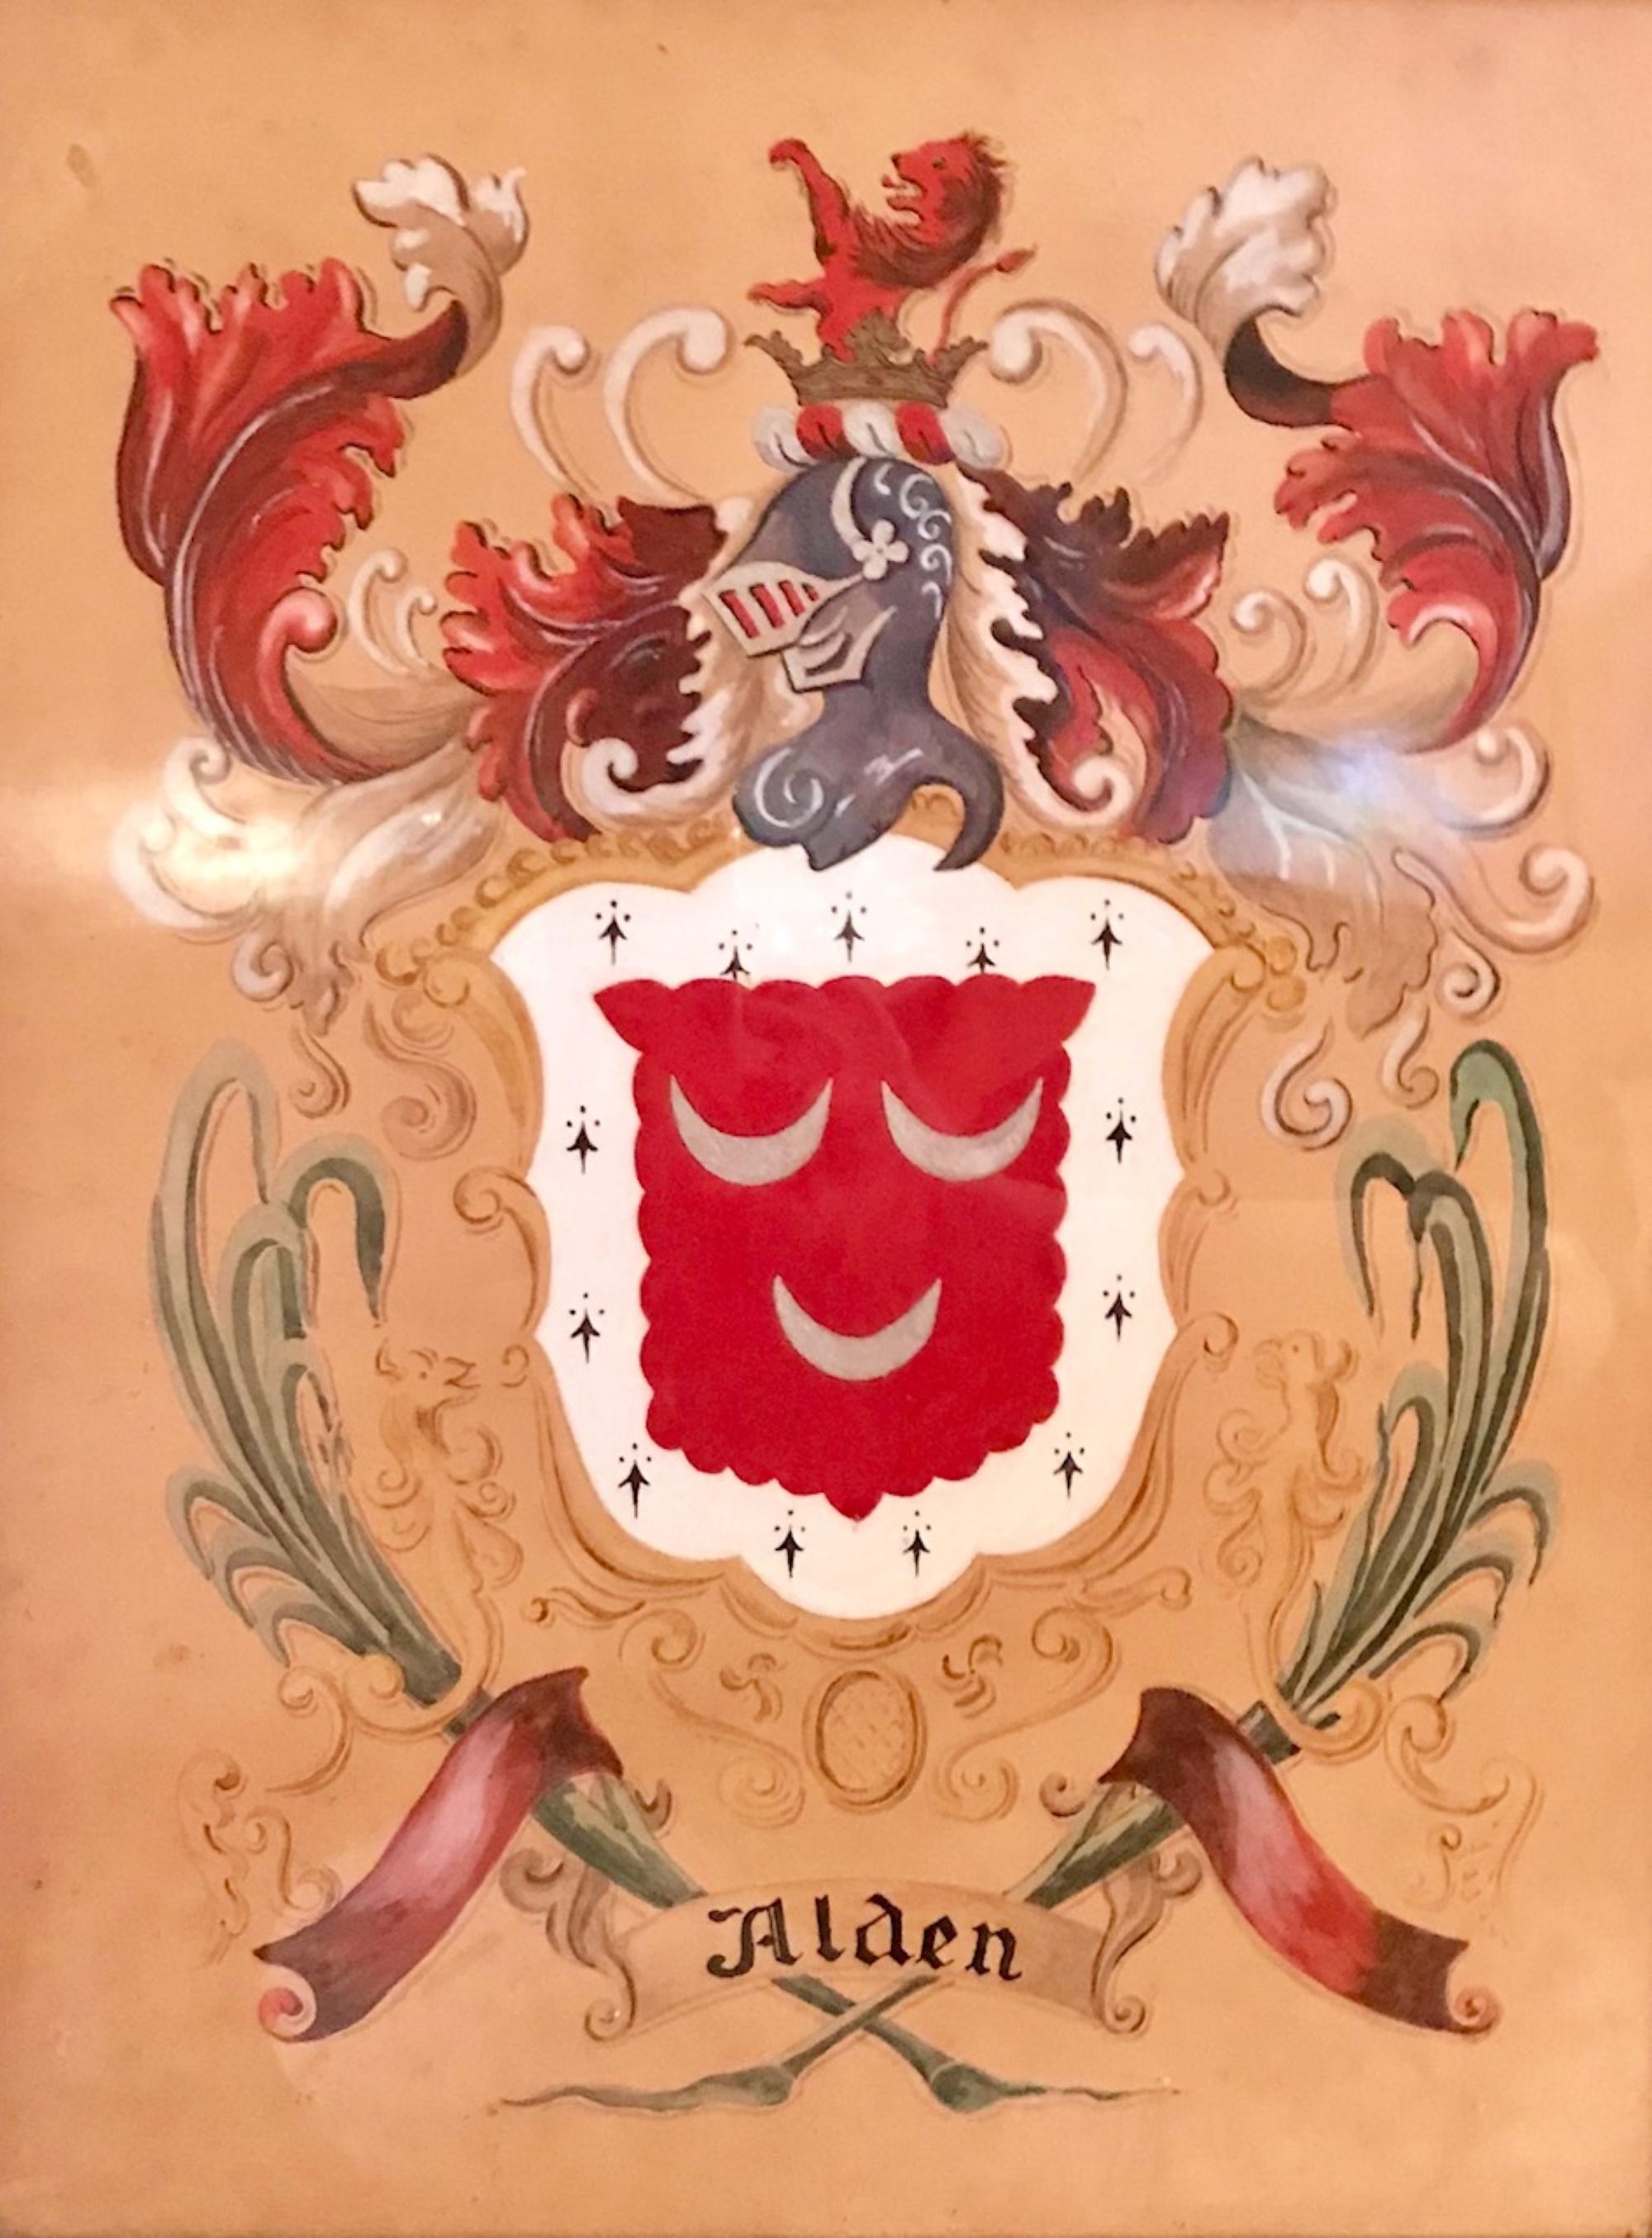 19th century Alden coat of arms surname Geneaology watercolor Guache on paper historic heraldry scottish family crest blazons

This ancient Coat of Arms is hand painted artwork honoring the Scottish family of Alden. This good work is watercolor and